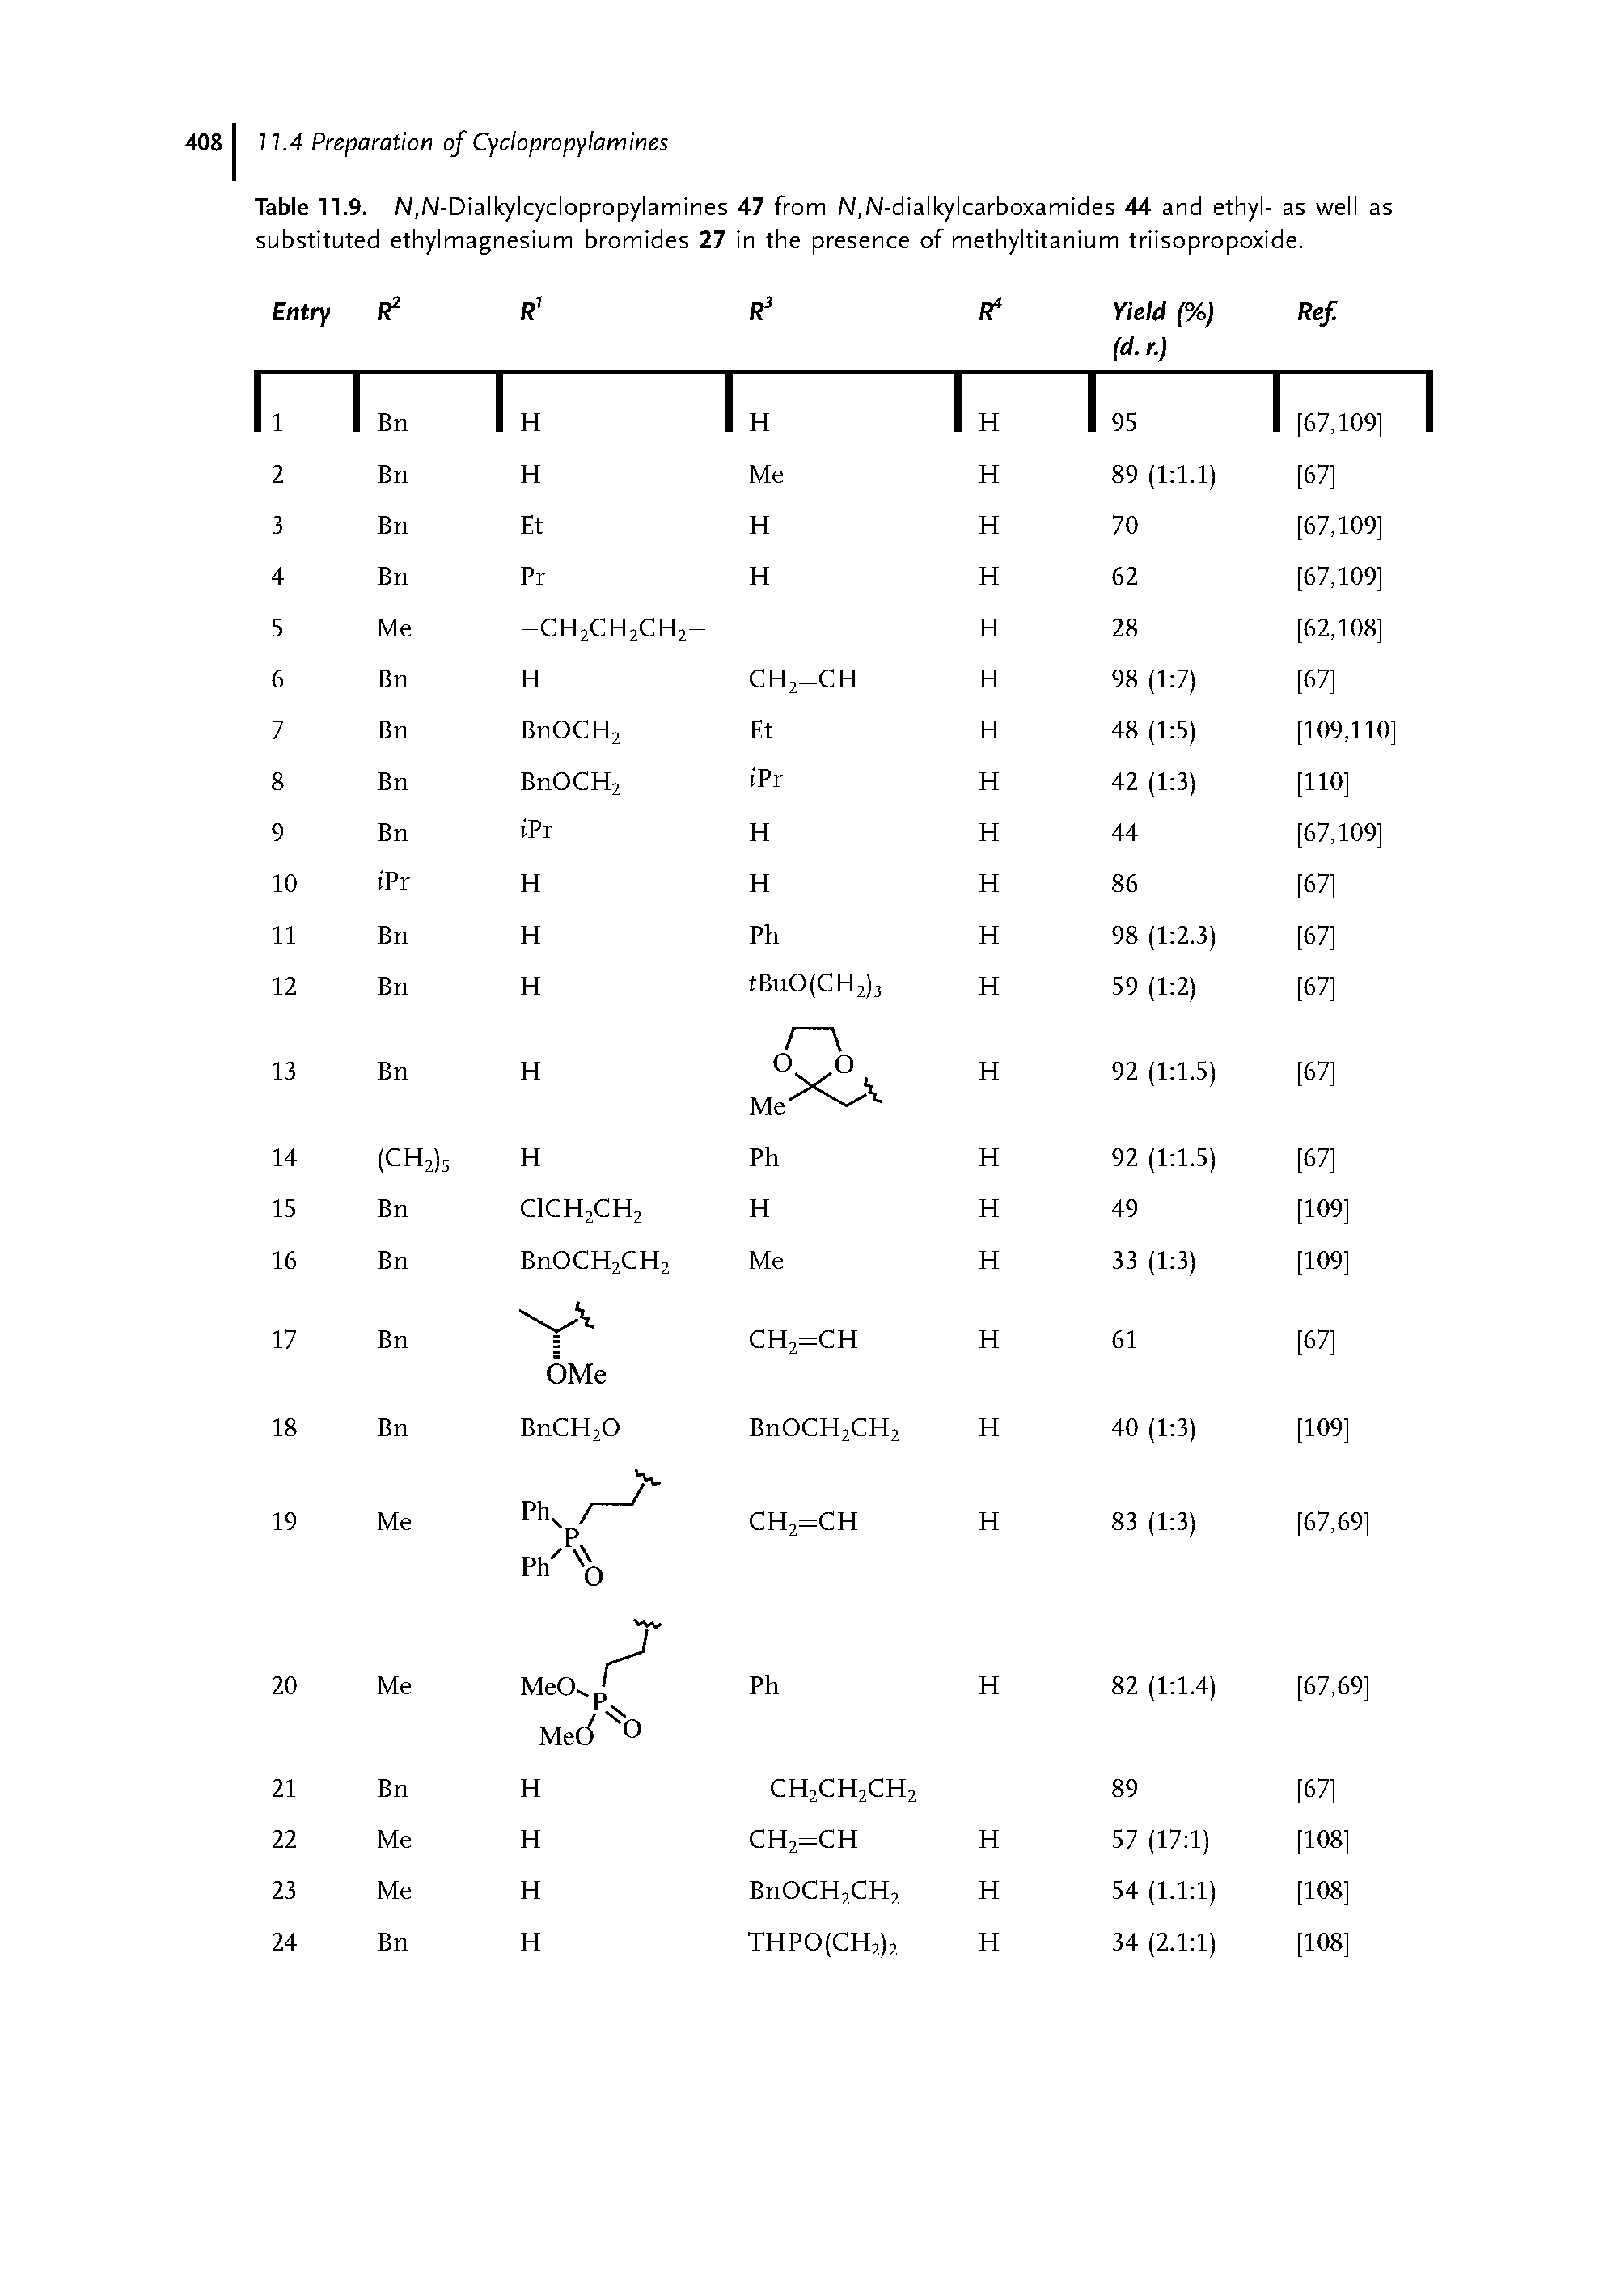 Table 11.9. /V,/V-Dialkylcyclopropylamines 47 from /V,/V-dialkylcarboxamides 44 and ethyl- as well as substituted ethylmagnesium bromides 27 in the presence of methyltitanium triisopropoxide.